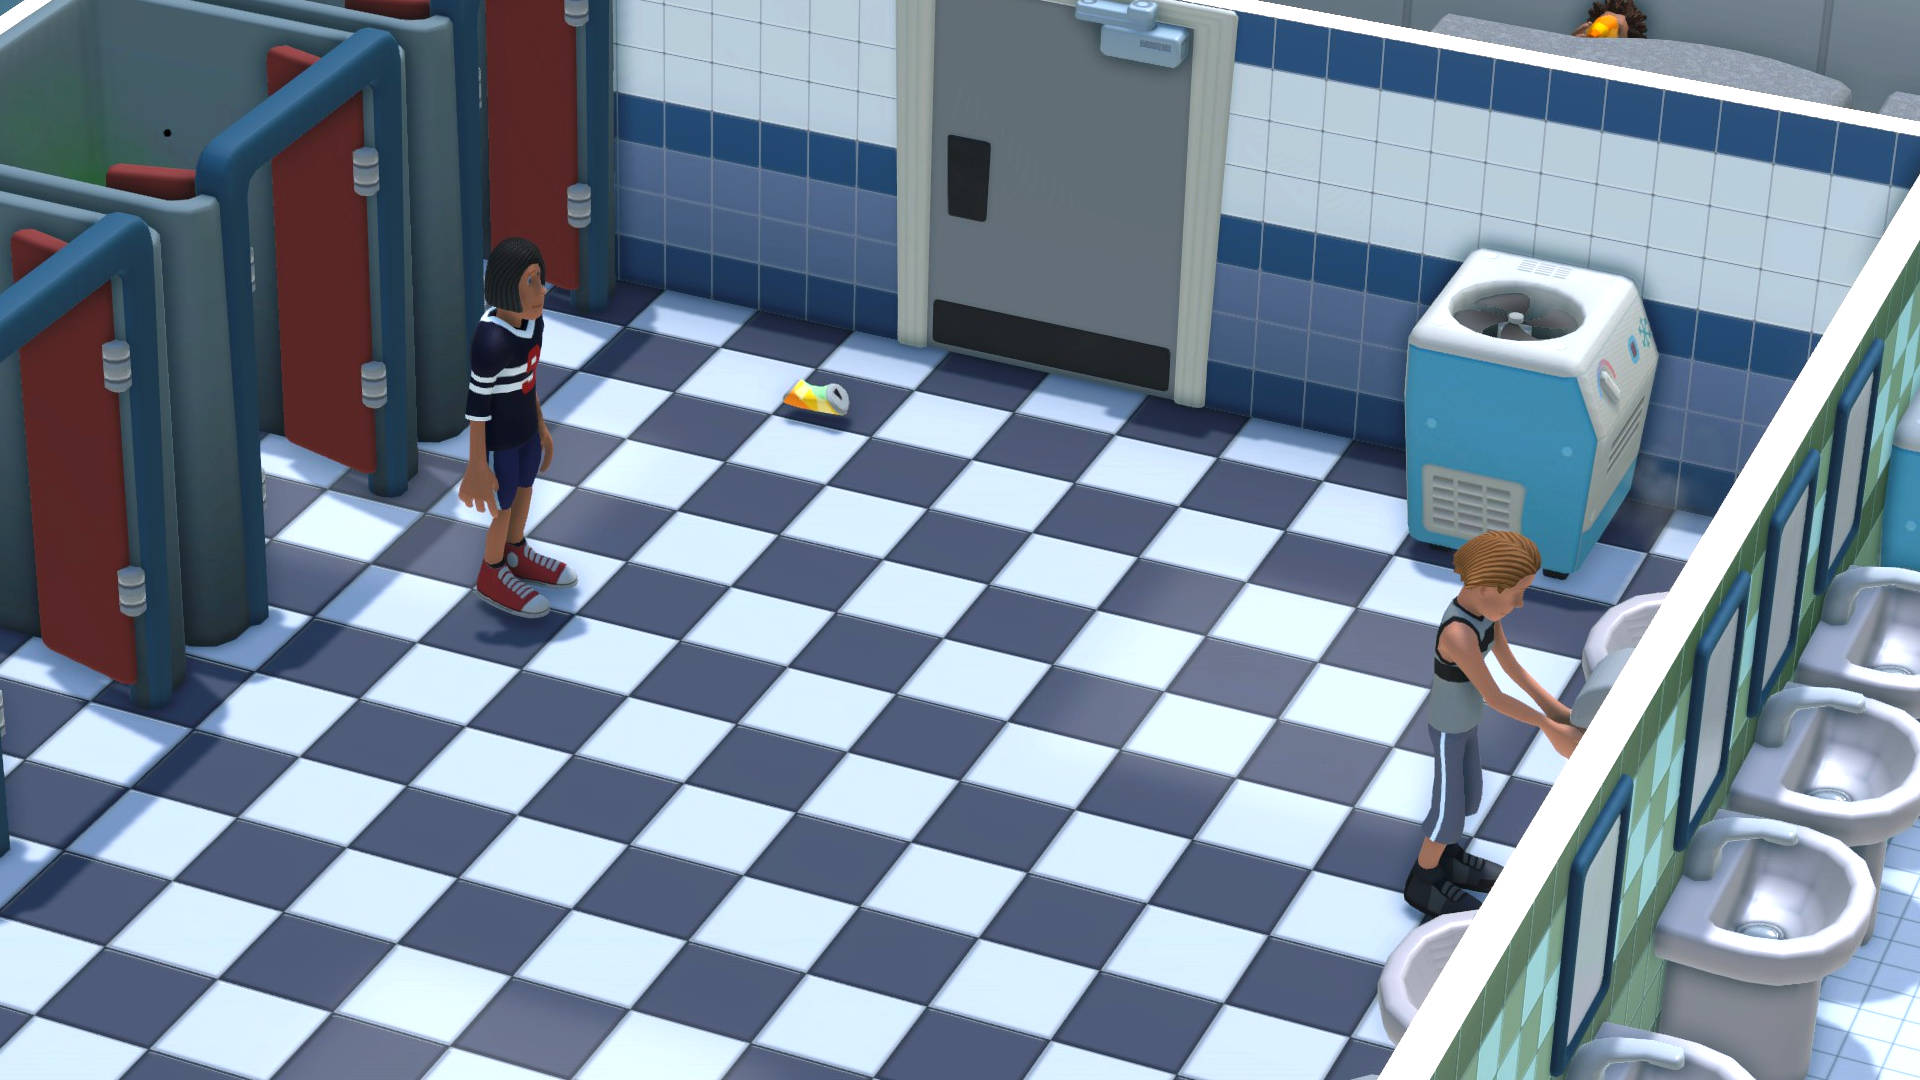 Two Point Campus guide: a bathroom with two people in it. One is watching the other washing his hands.